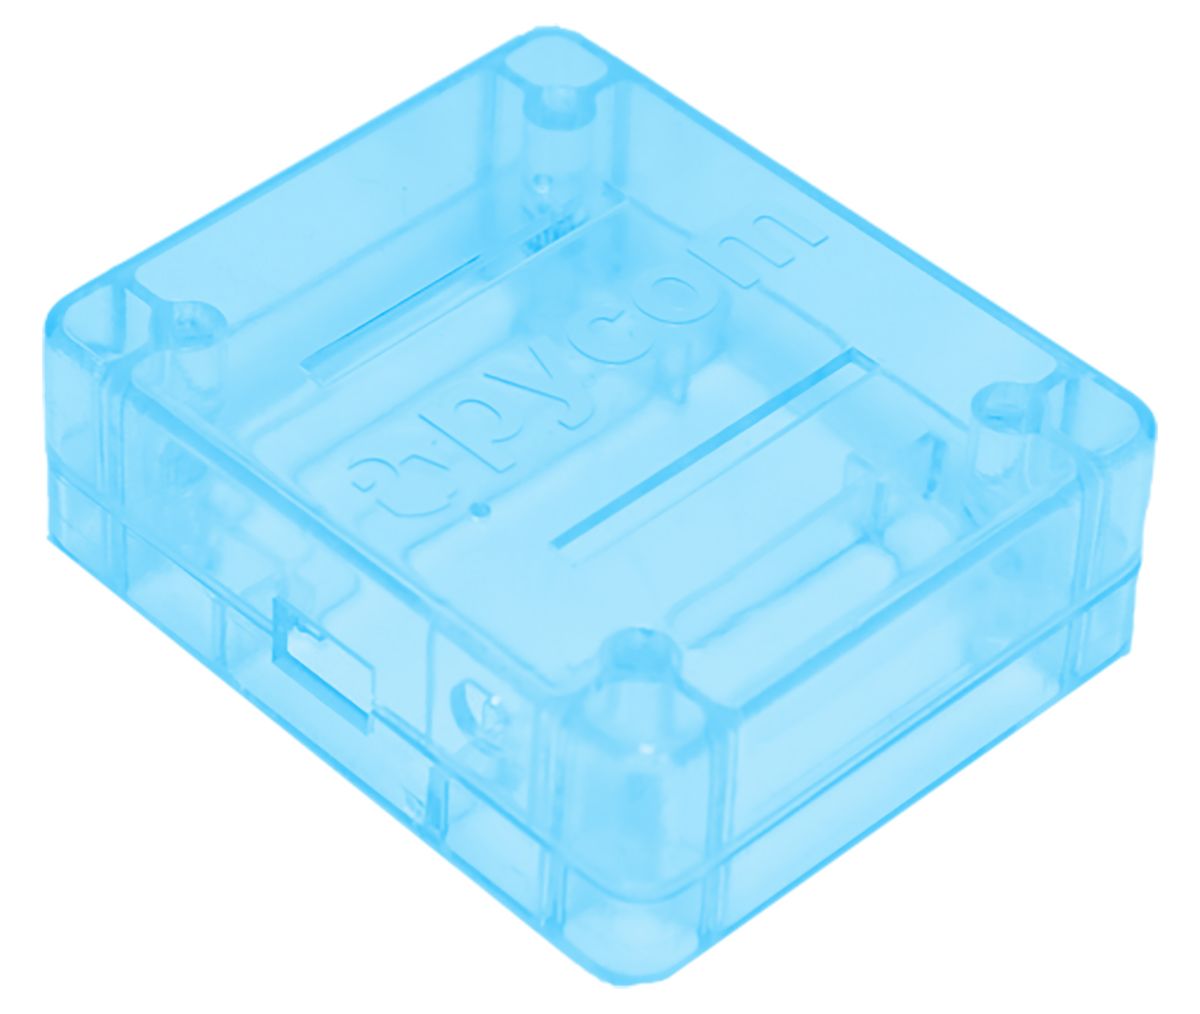 Pycom Case for Expansion Board, LoPy, WiPy, Transparent